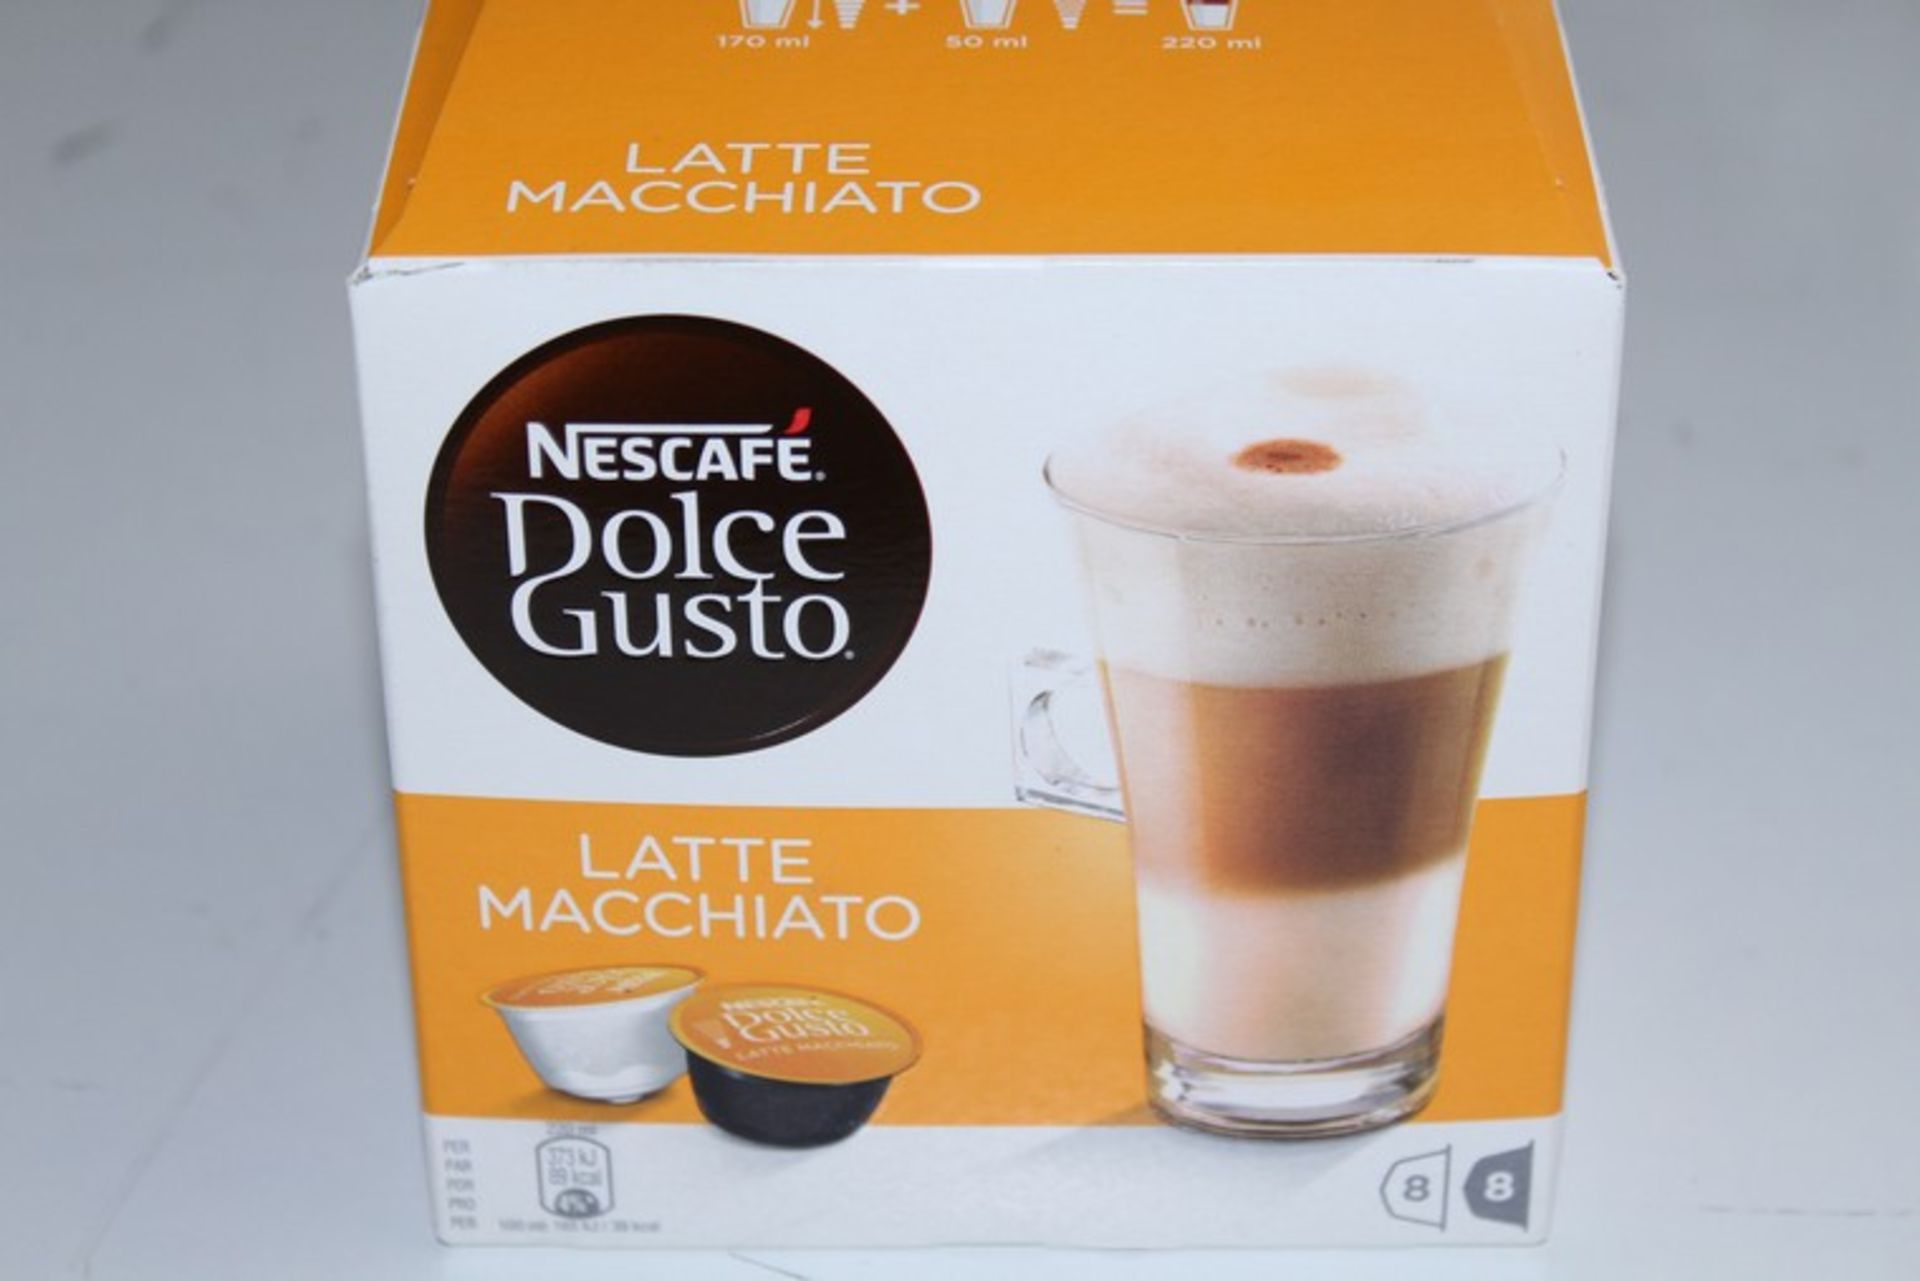 10 x BOXES EACH CONTAINING 16 NEST CAFÉ DOLCE GUSTO LATTE MACCHITO COFFEE *PLEASE NOTE THAT THE